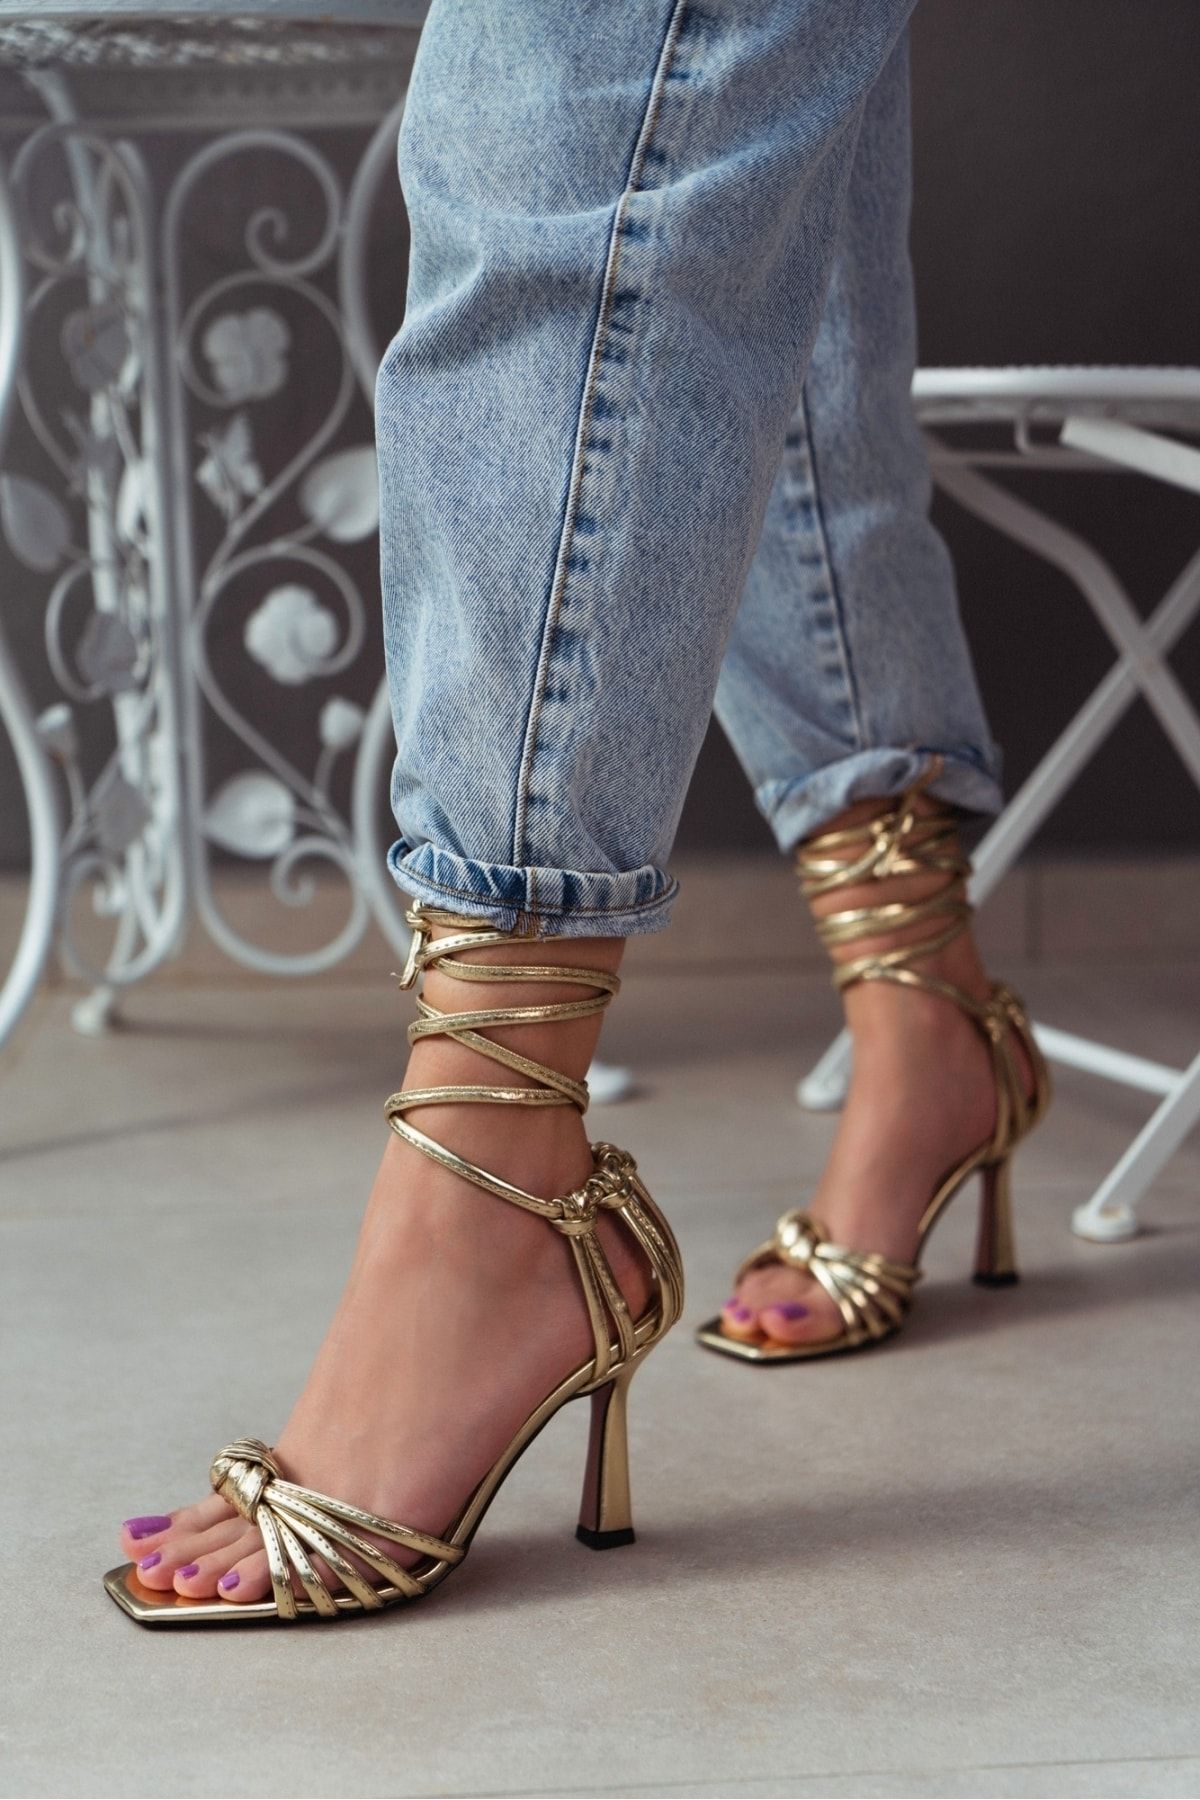 Golden Strappy Heeled Sandals, Thin Front Strap, 6.5cm Open-toe Block Heels,  Cross Over Strap, Closed Back Ankle Closure, Elevate Your Look - Etsy